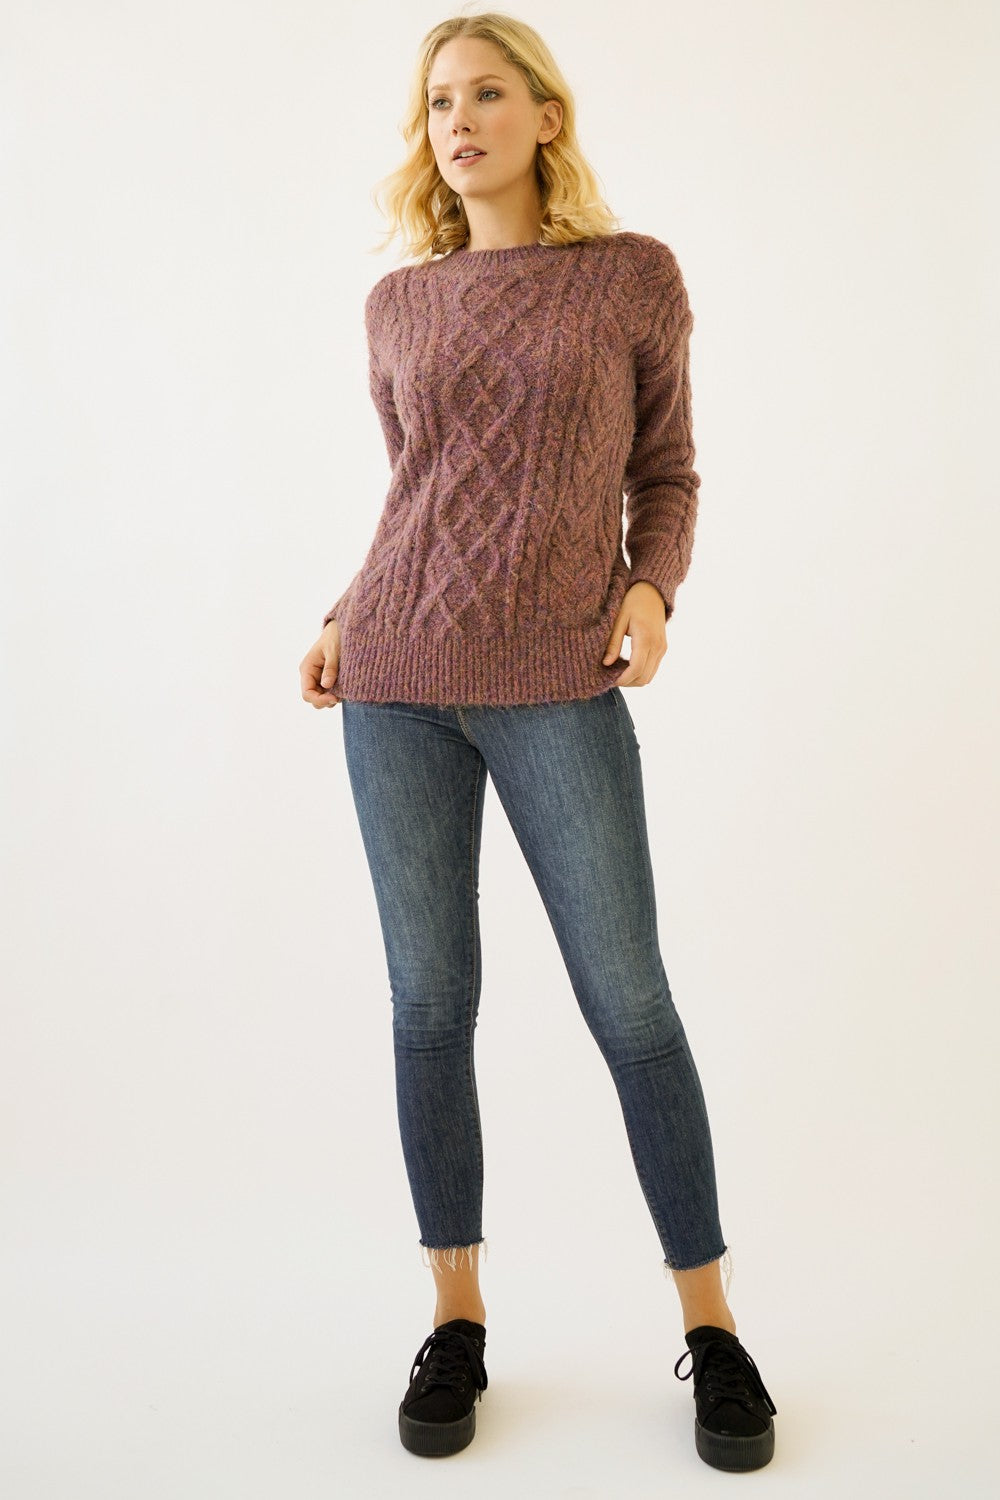 Berry Knit Sweater